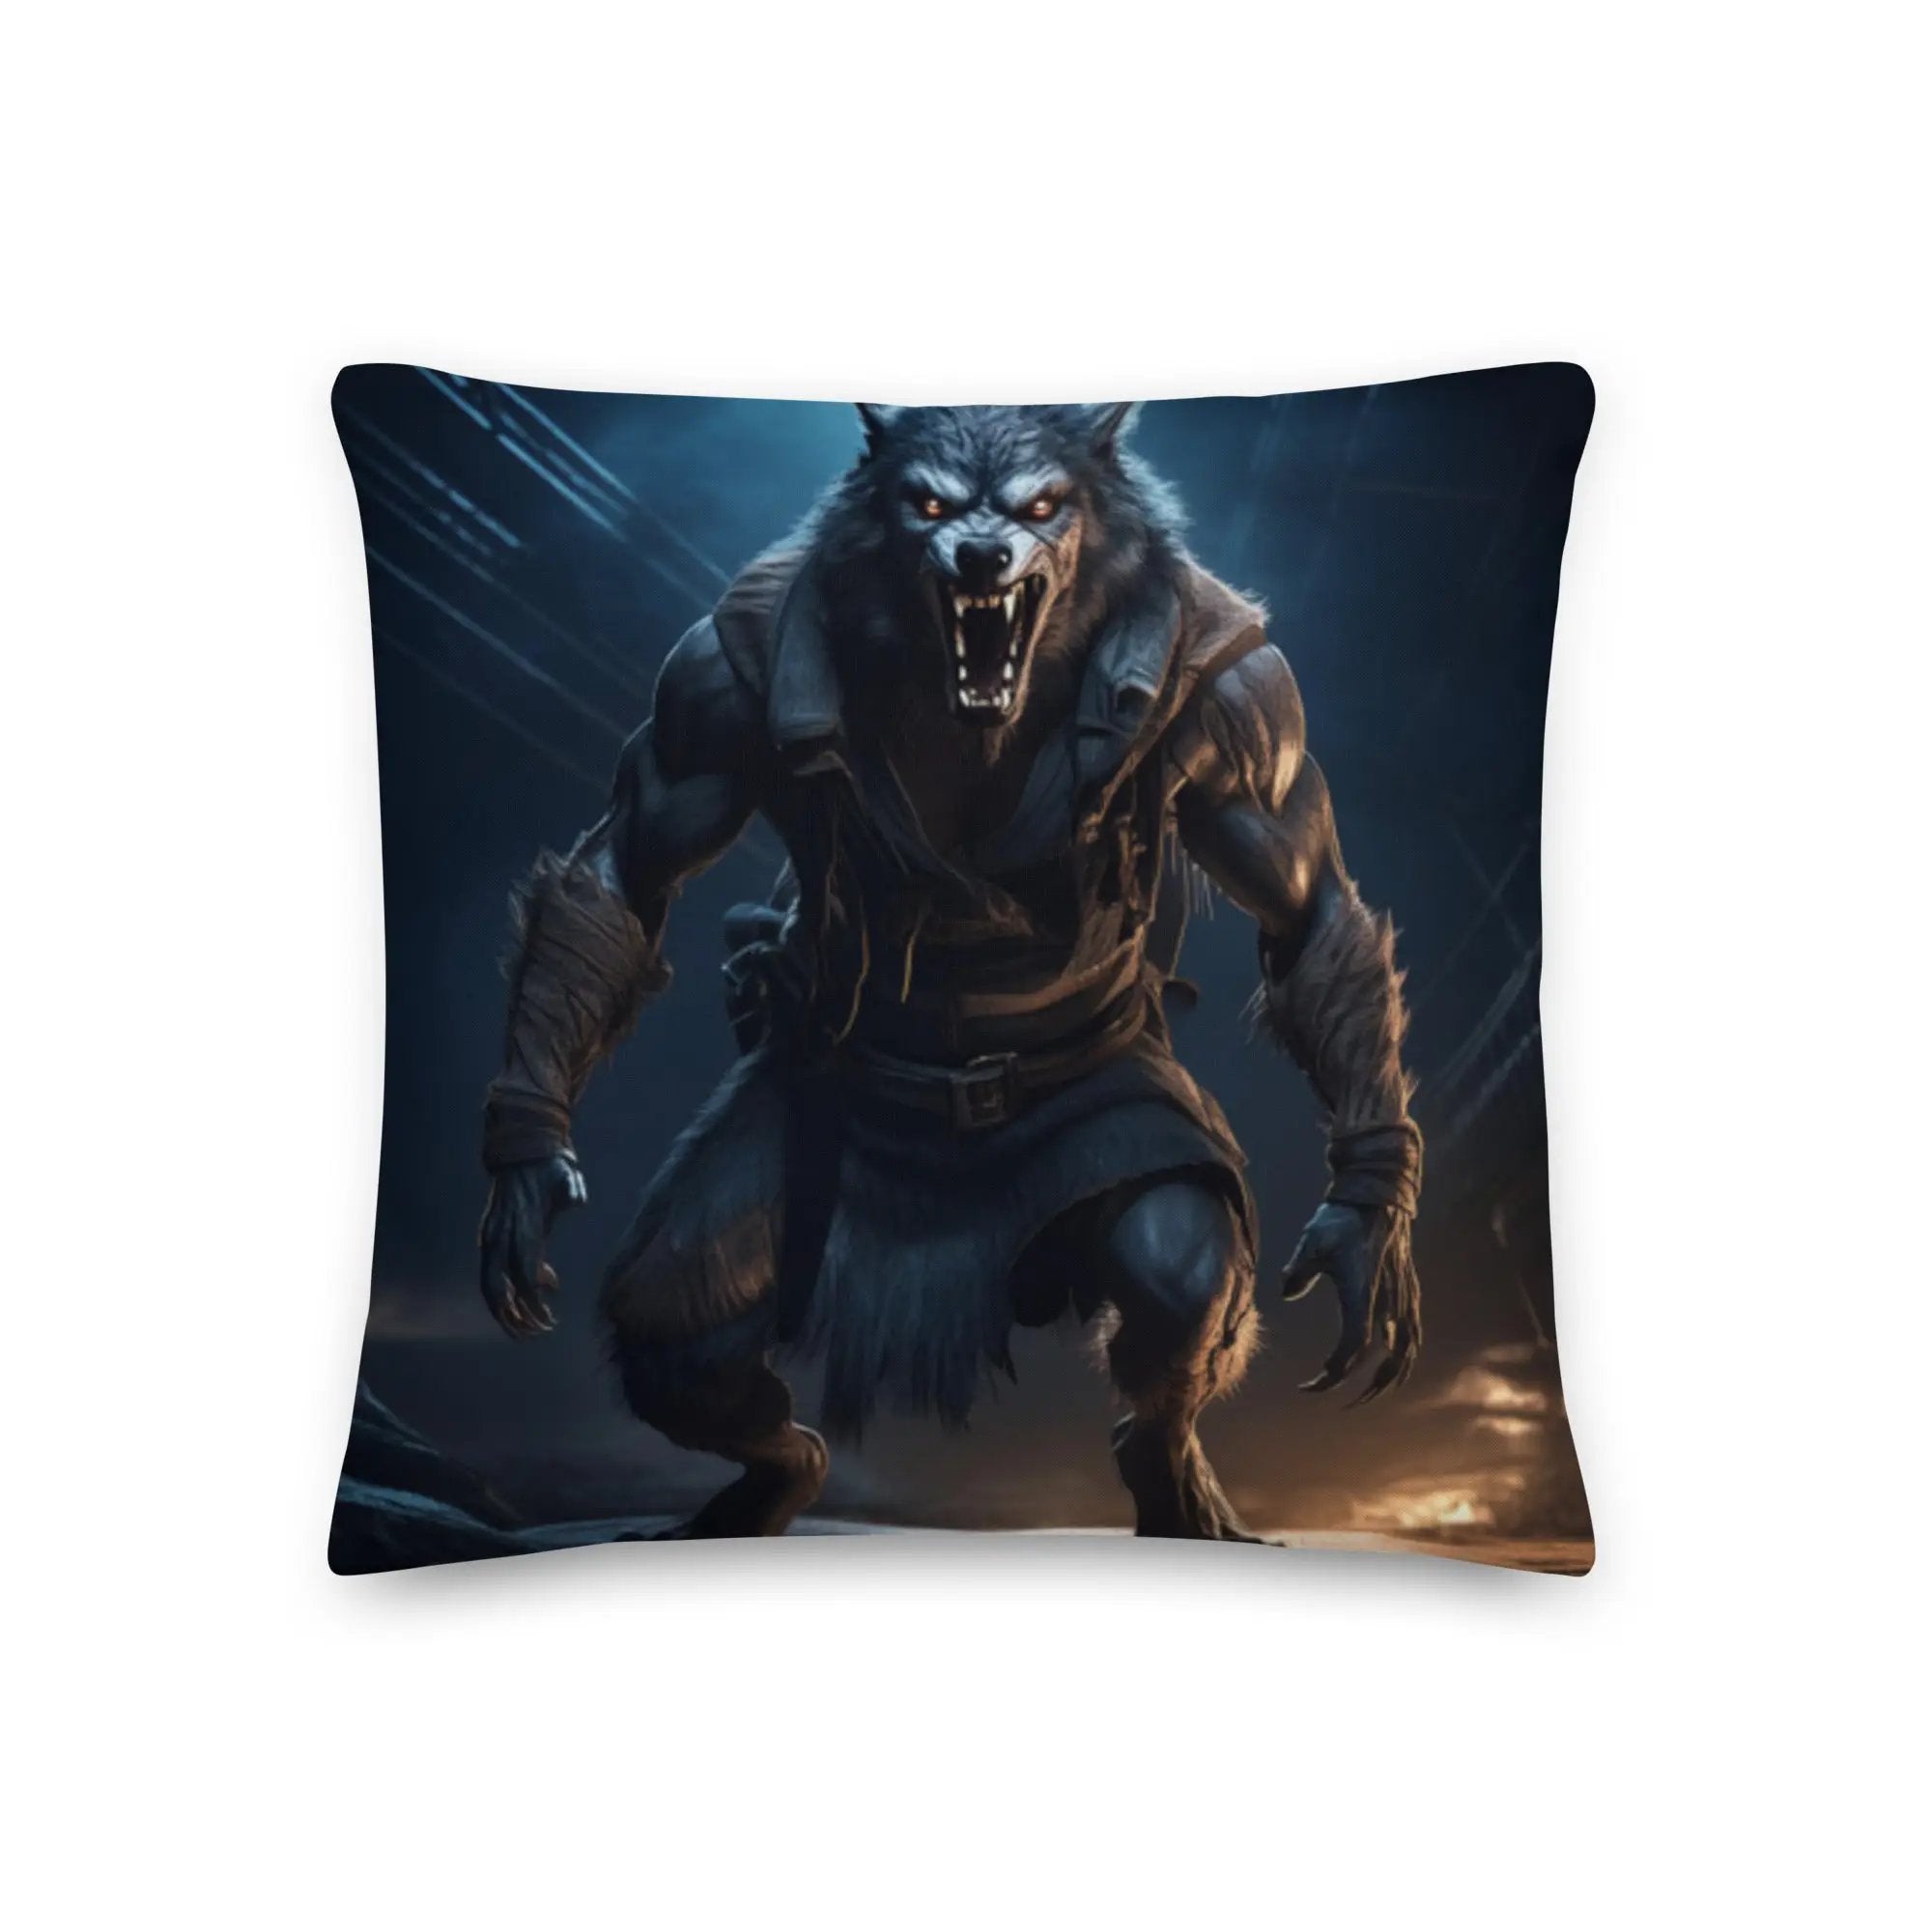 The Monster Squad "Wolfman" Premium Pillow